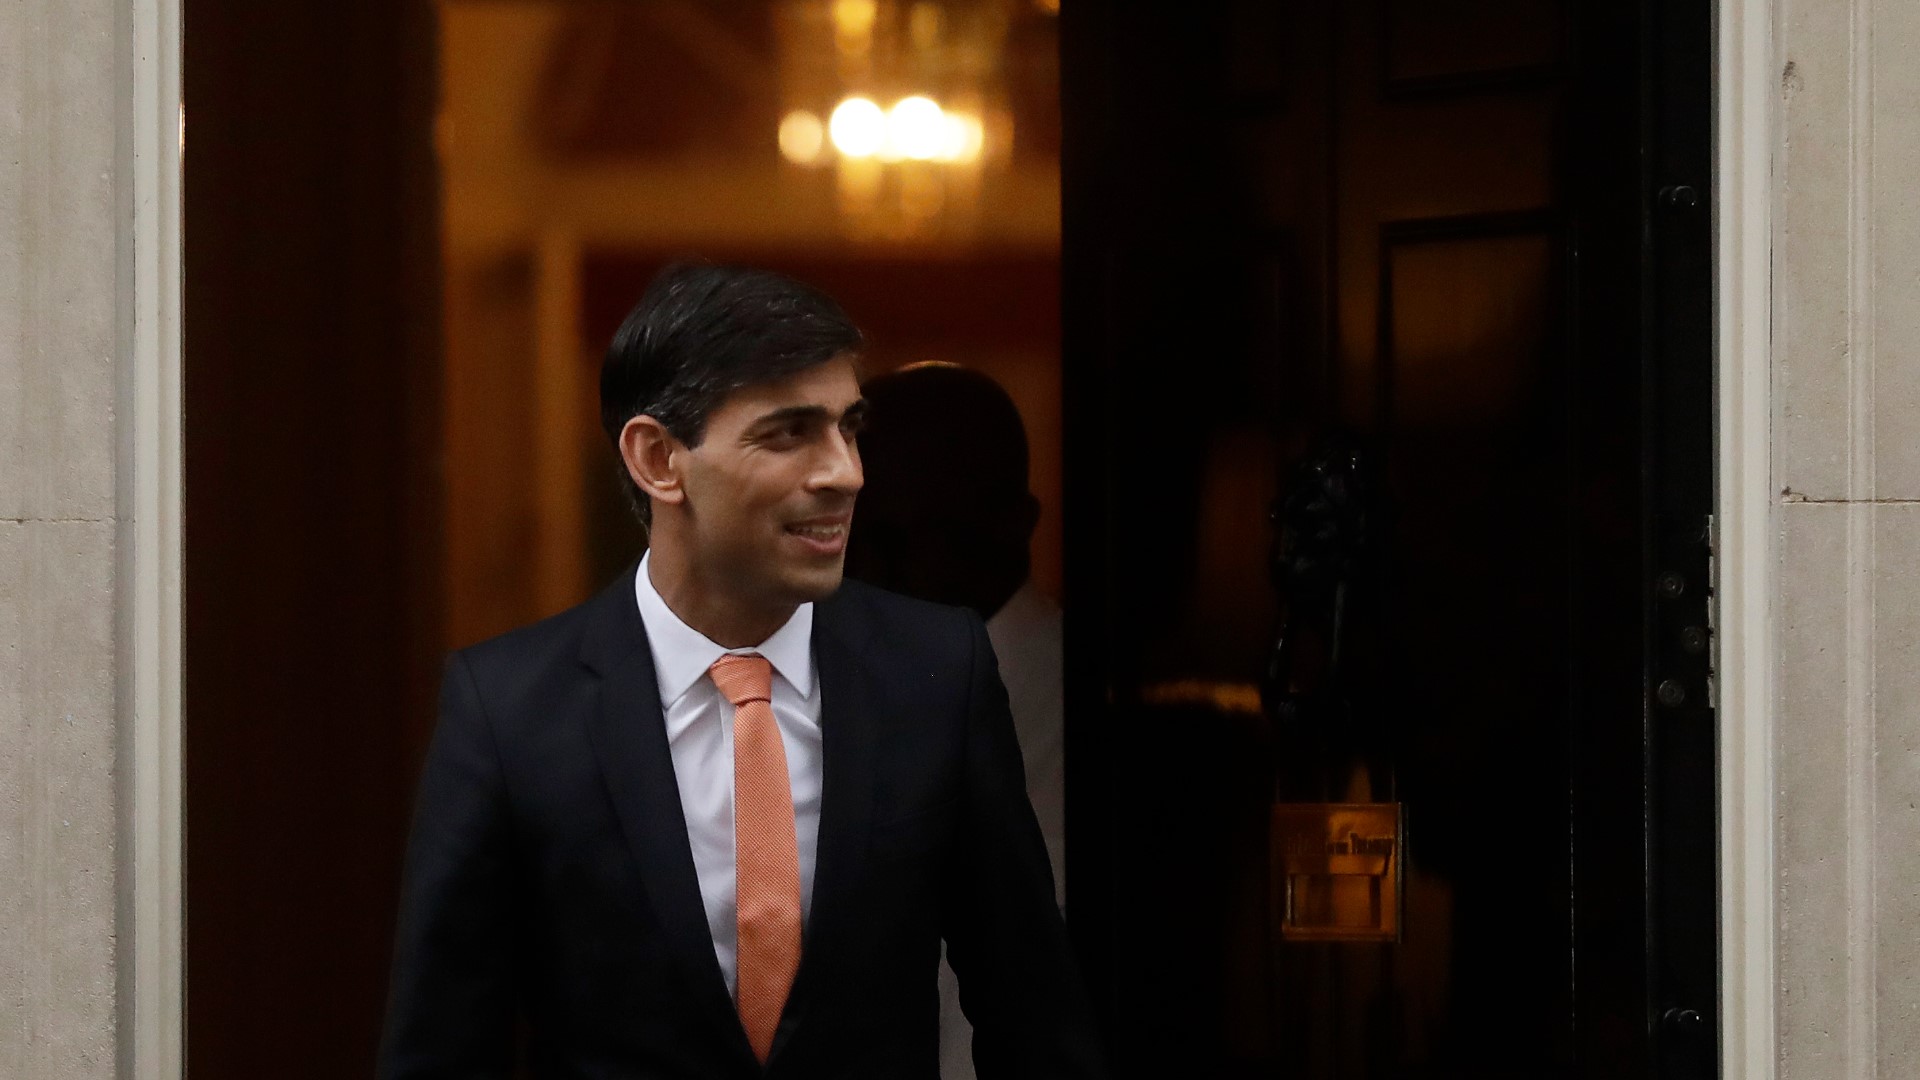 Rishi Sunak will be Britain’s first leader of color, the first Hindu to take the top job and the youngest prime minister for more than 200 years.